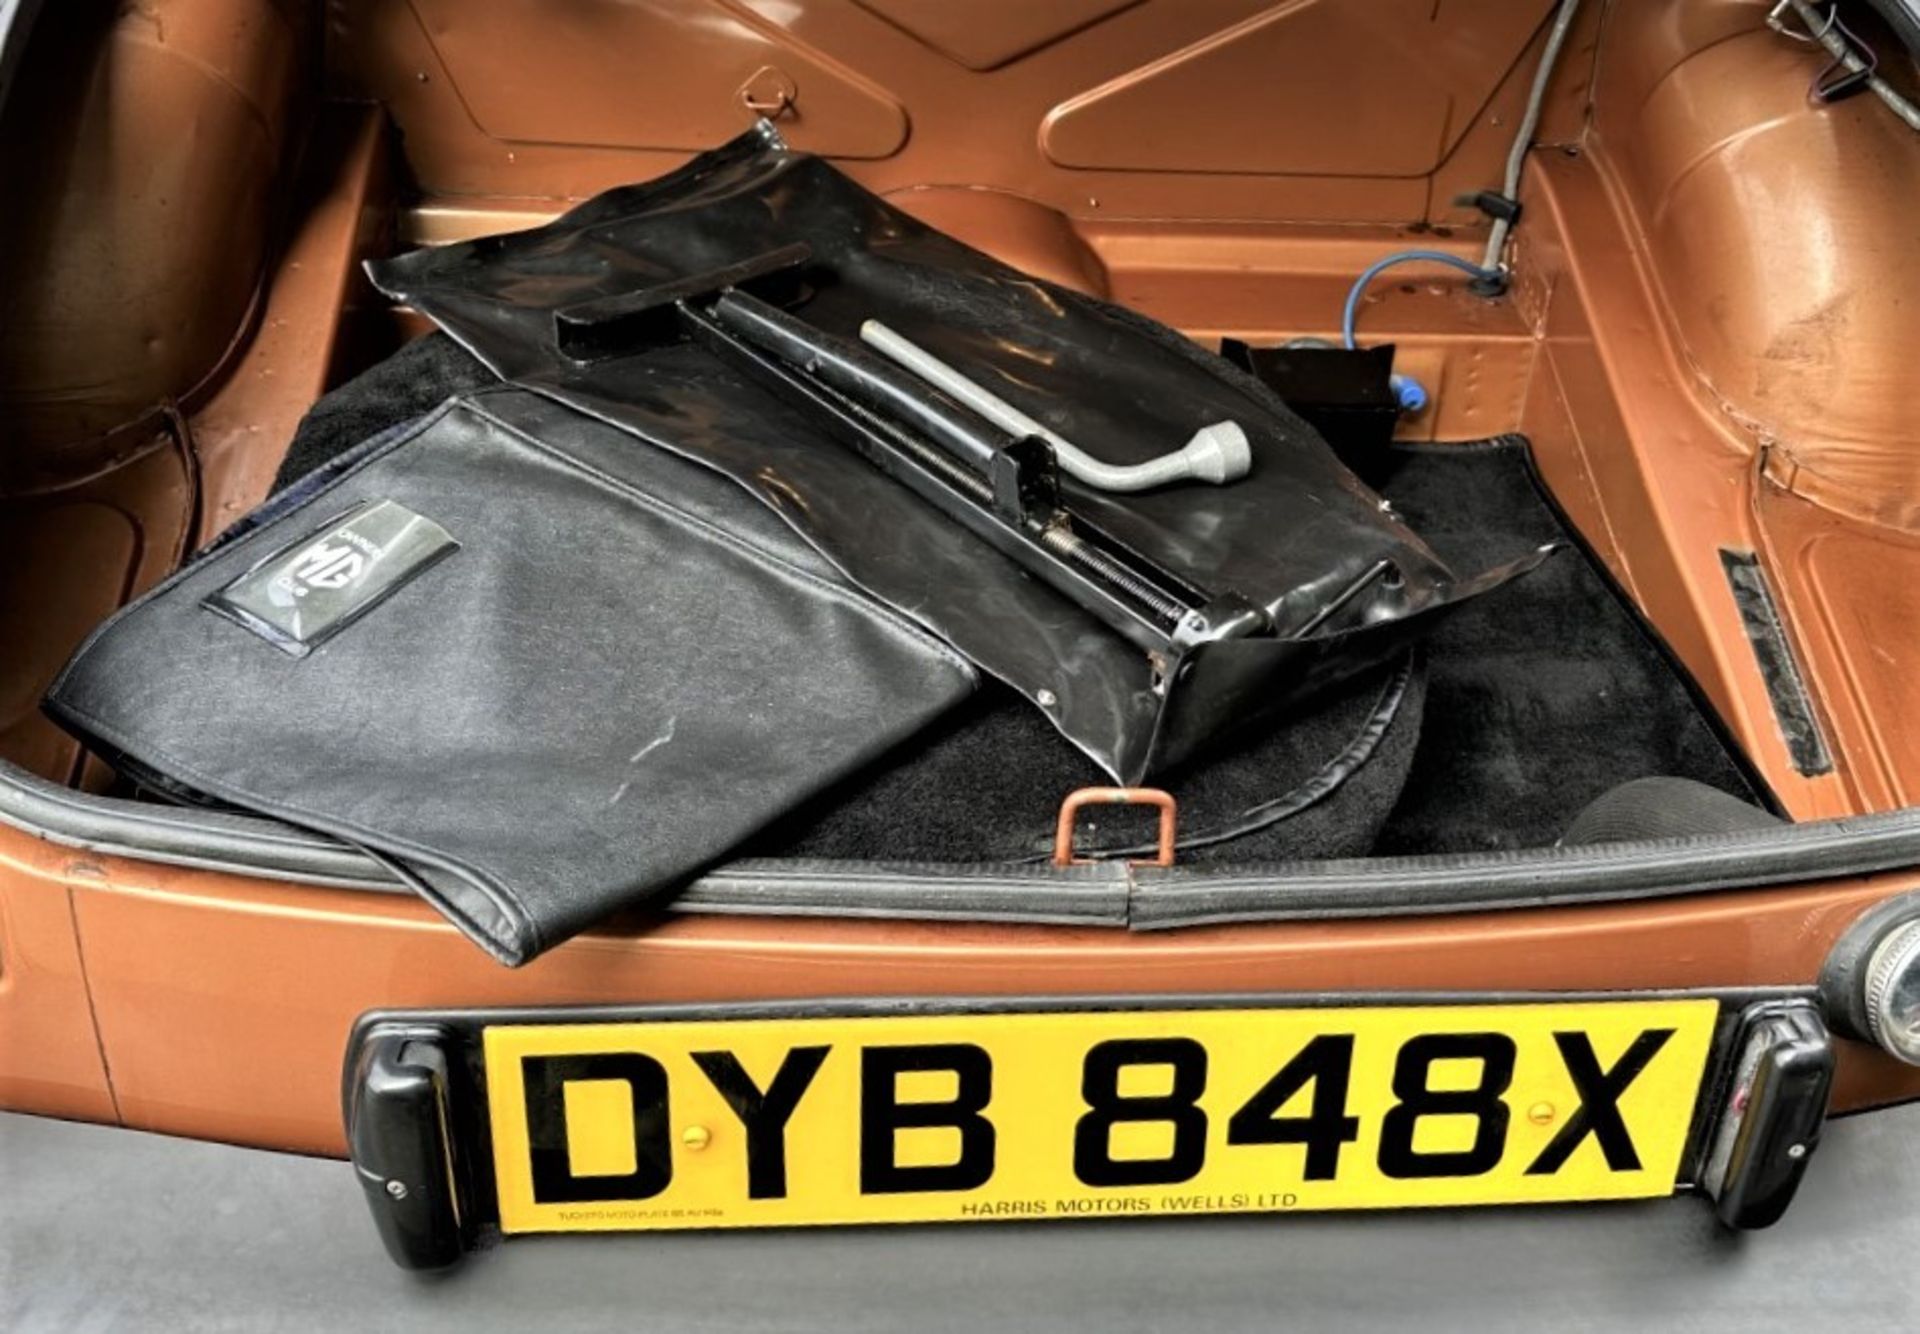 1981 MGB LE ROADSTER - offered at No Reserve Registration Number: DYB 848X Chassis Number: - Image 15 of 16